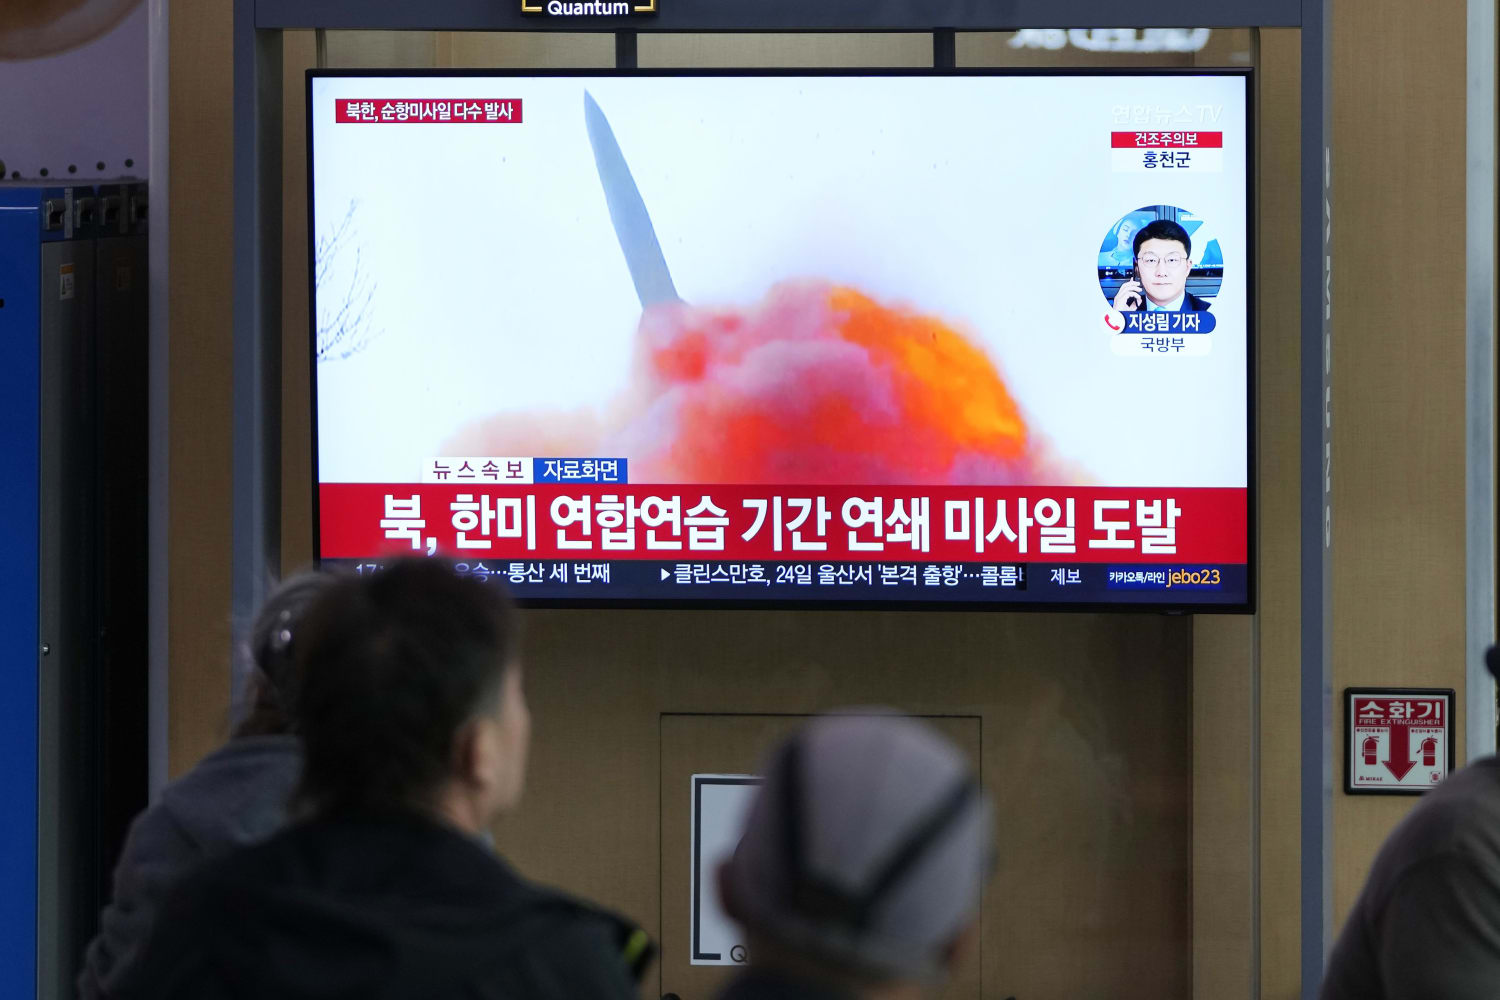 North Korea fires cruise missiles as U.S. and South Korea stage drills